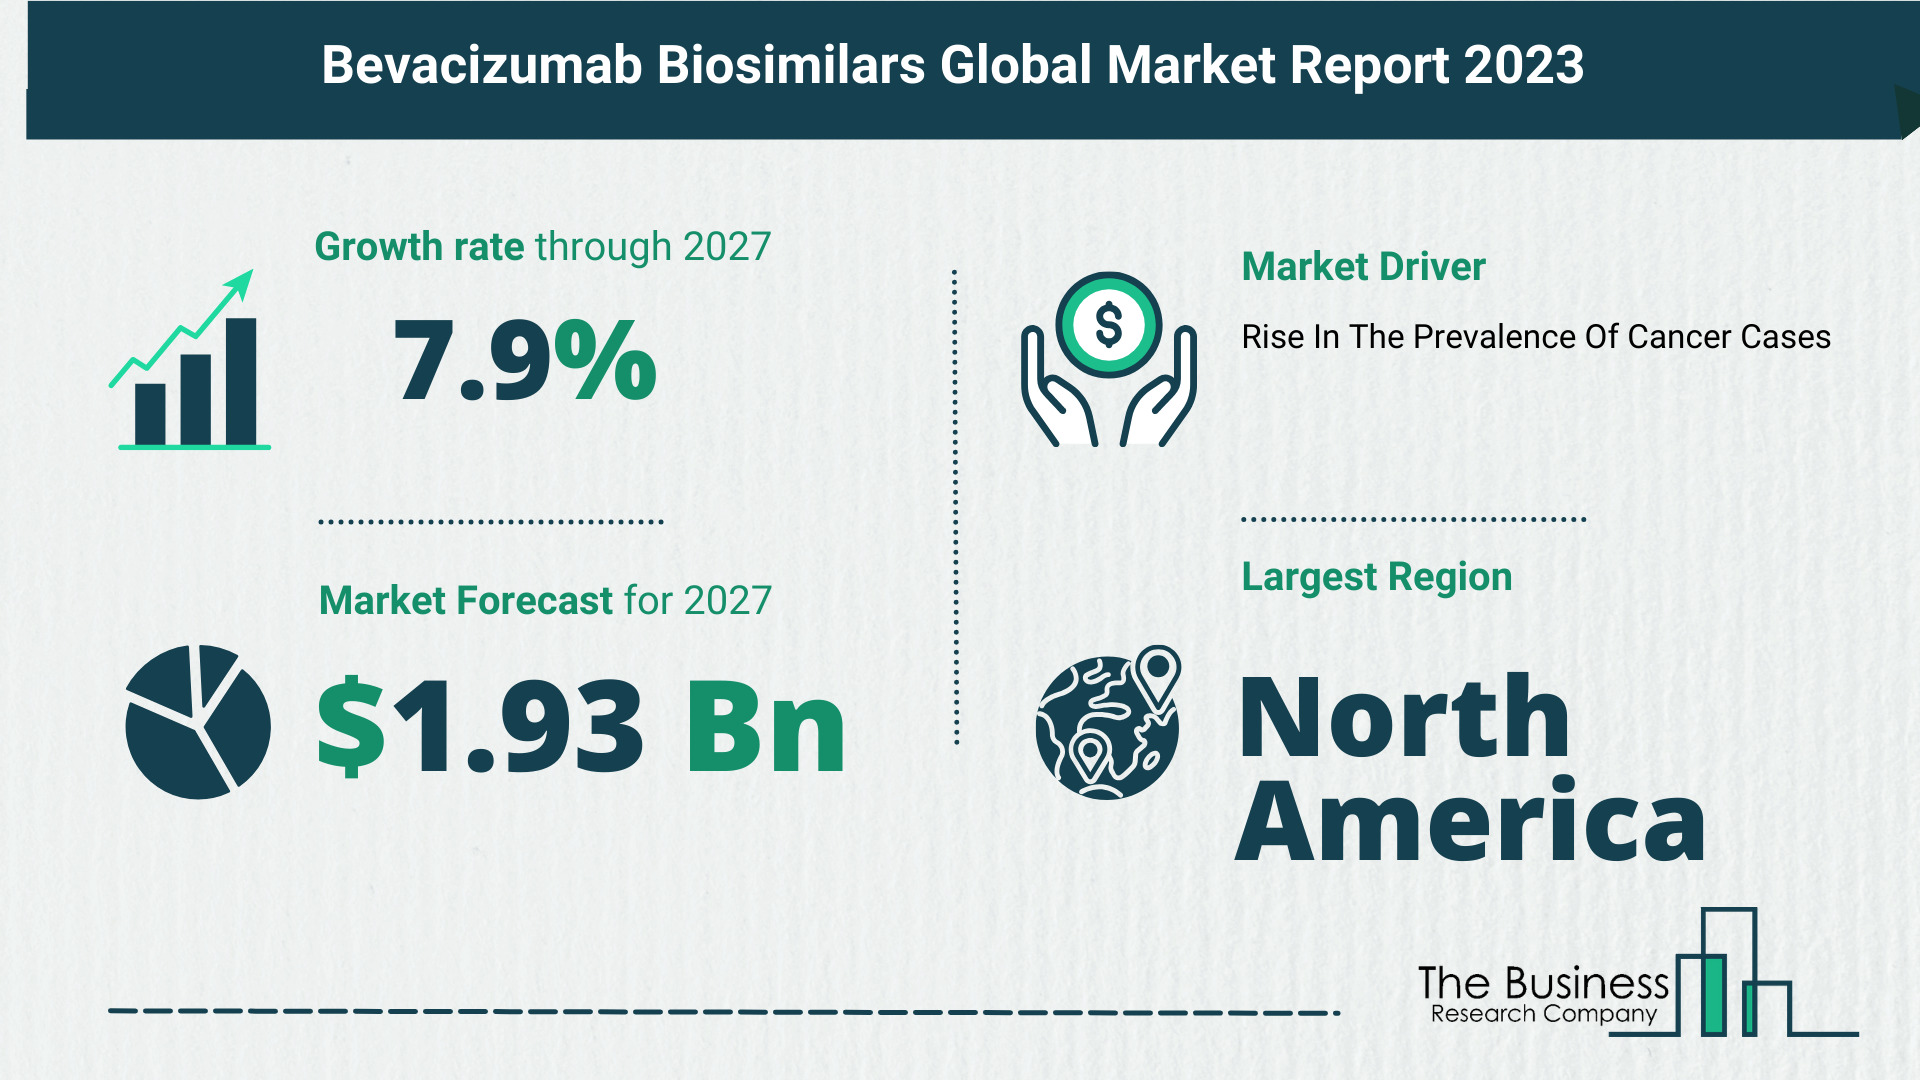 What Is The Forecast Growth Rate For The Bevacizumab Biosimilars Market?